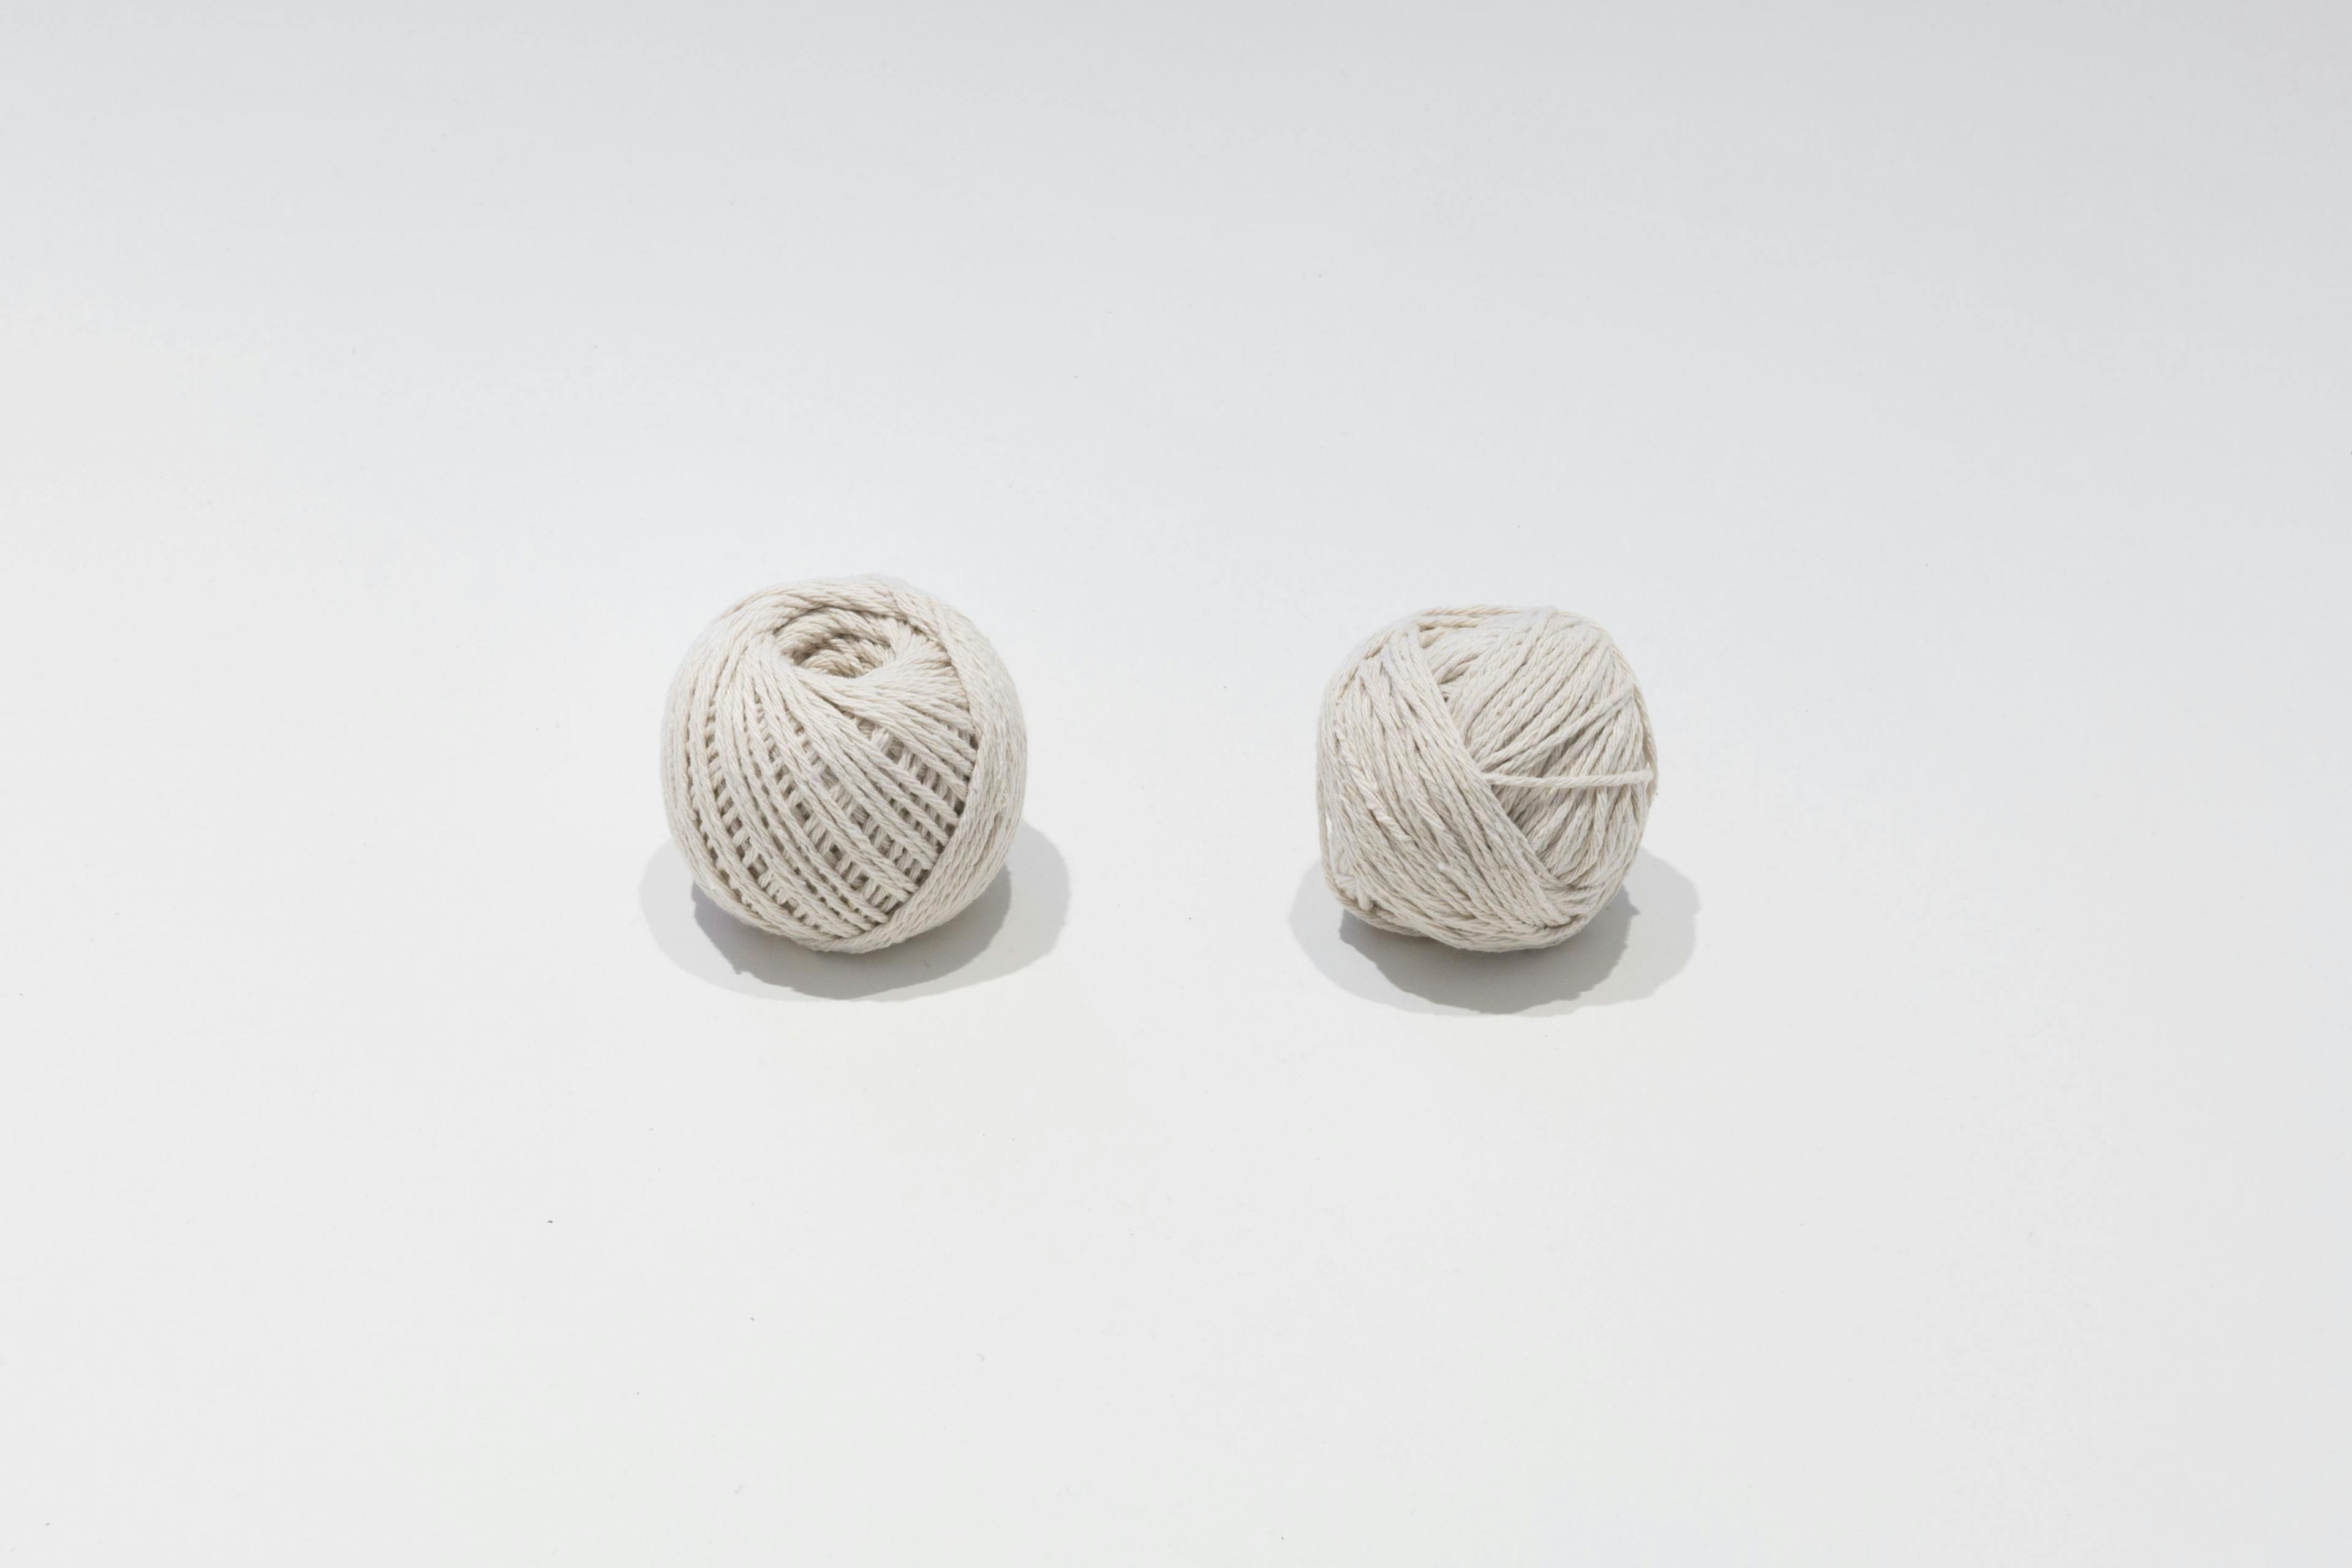 Two balls of white string placed on a white flat surface. The left ball is slightly more neatly rolled than the one on the right. 